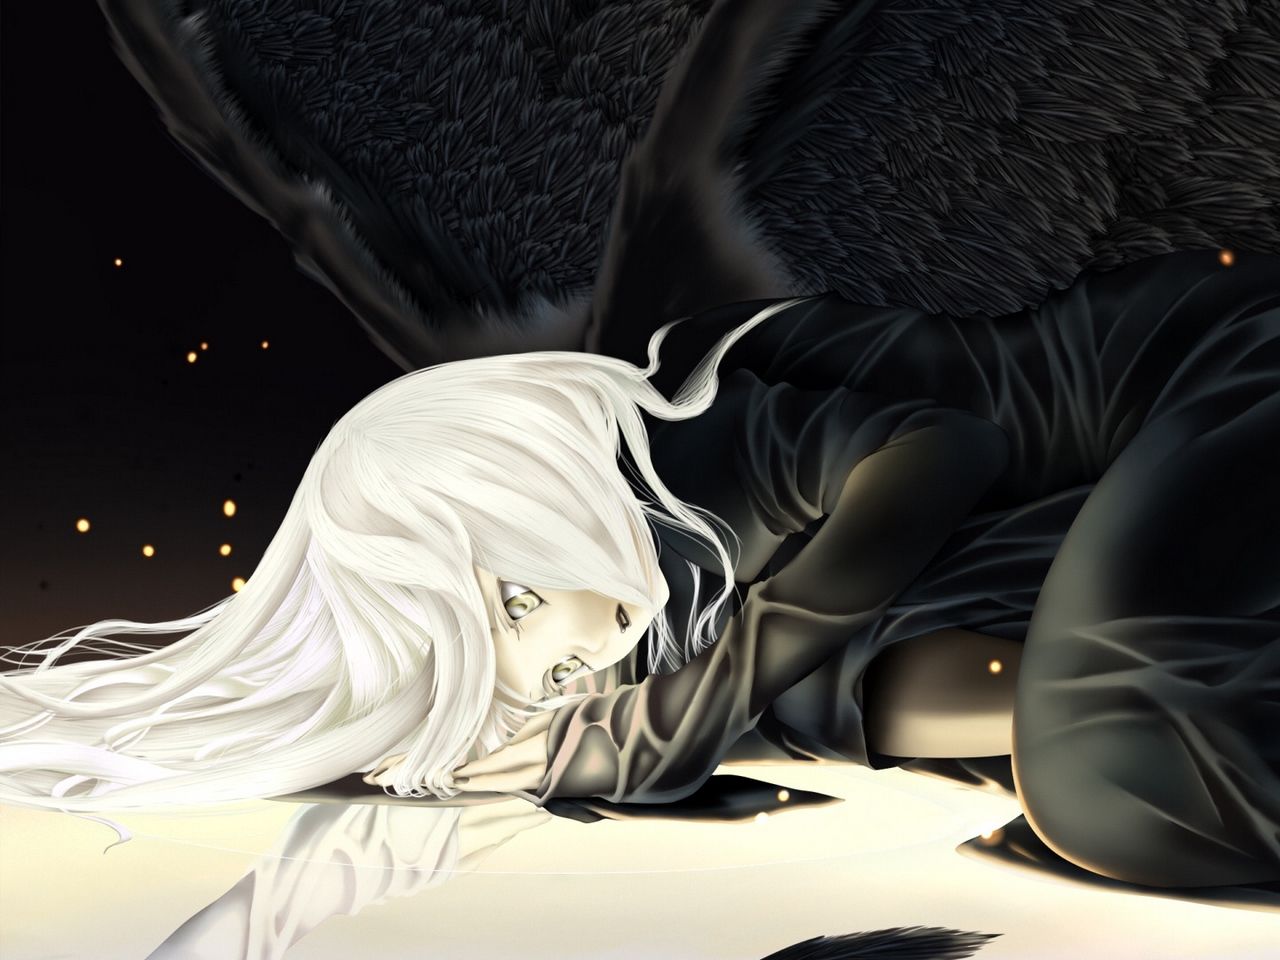 Download wallpaper 1280x960 anime, girl, blond, wing, sadness